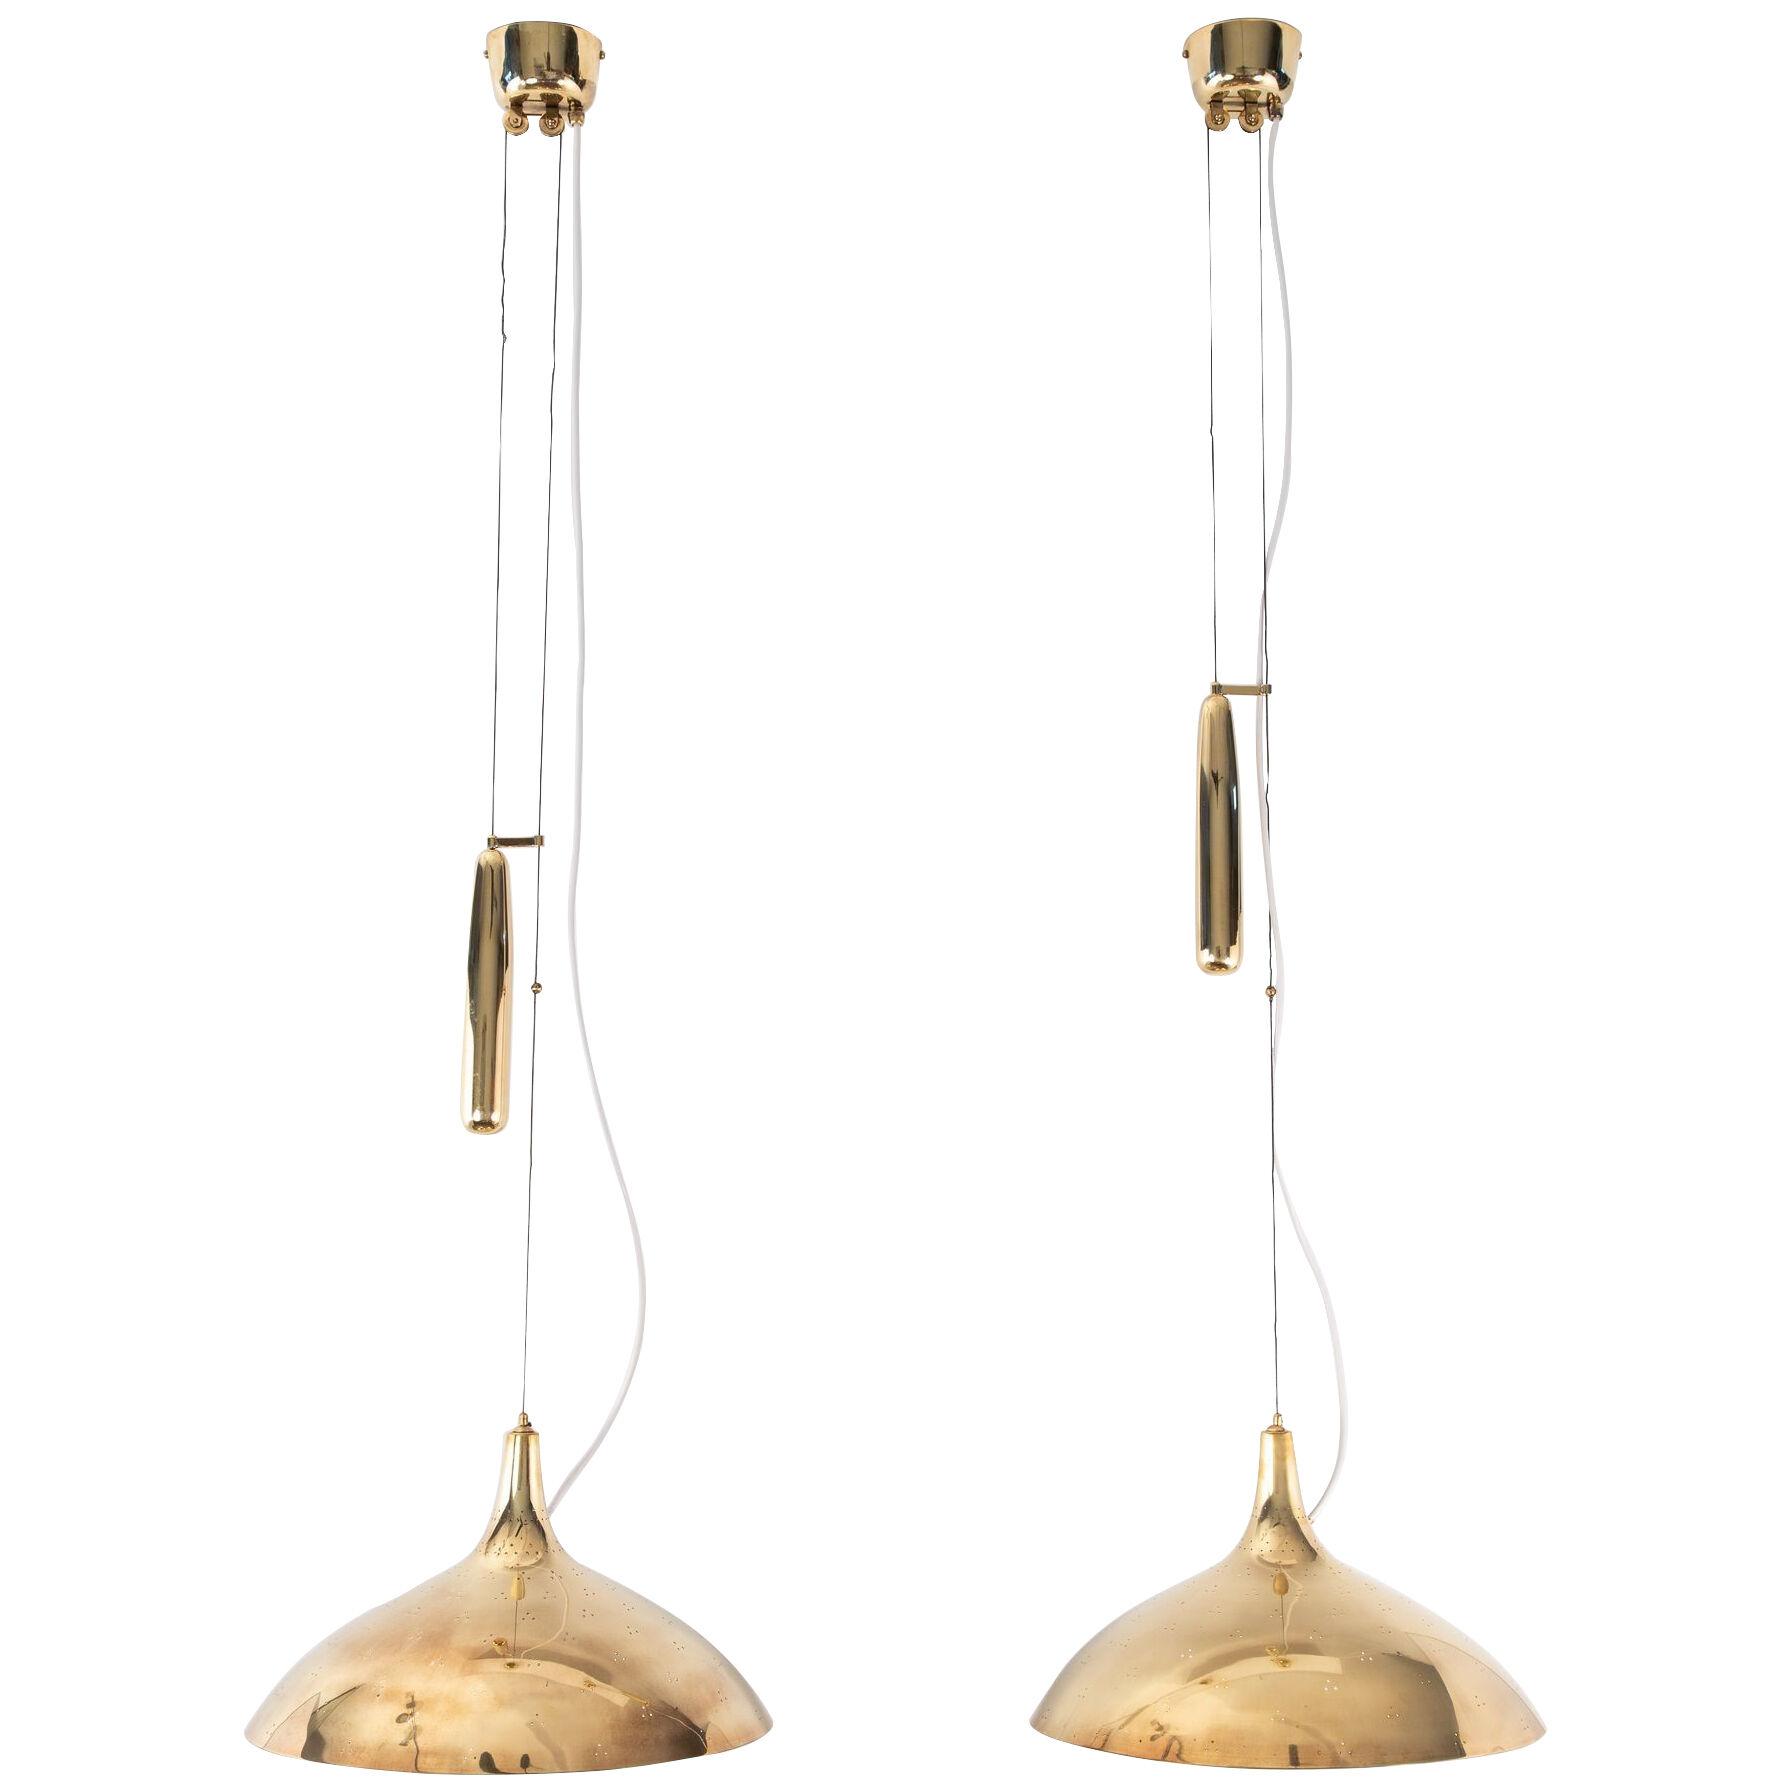 Paavo Tynell for Taito Oy Counterweight Pendant Ceiling Pendants